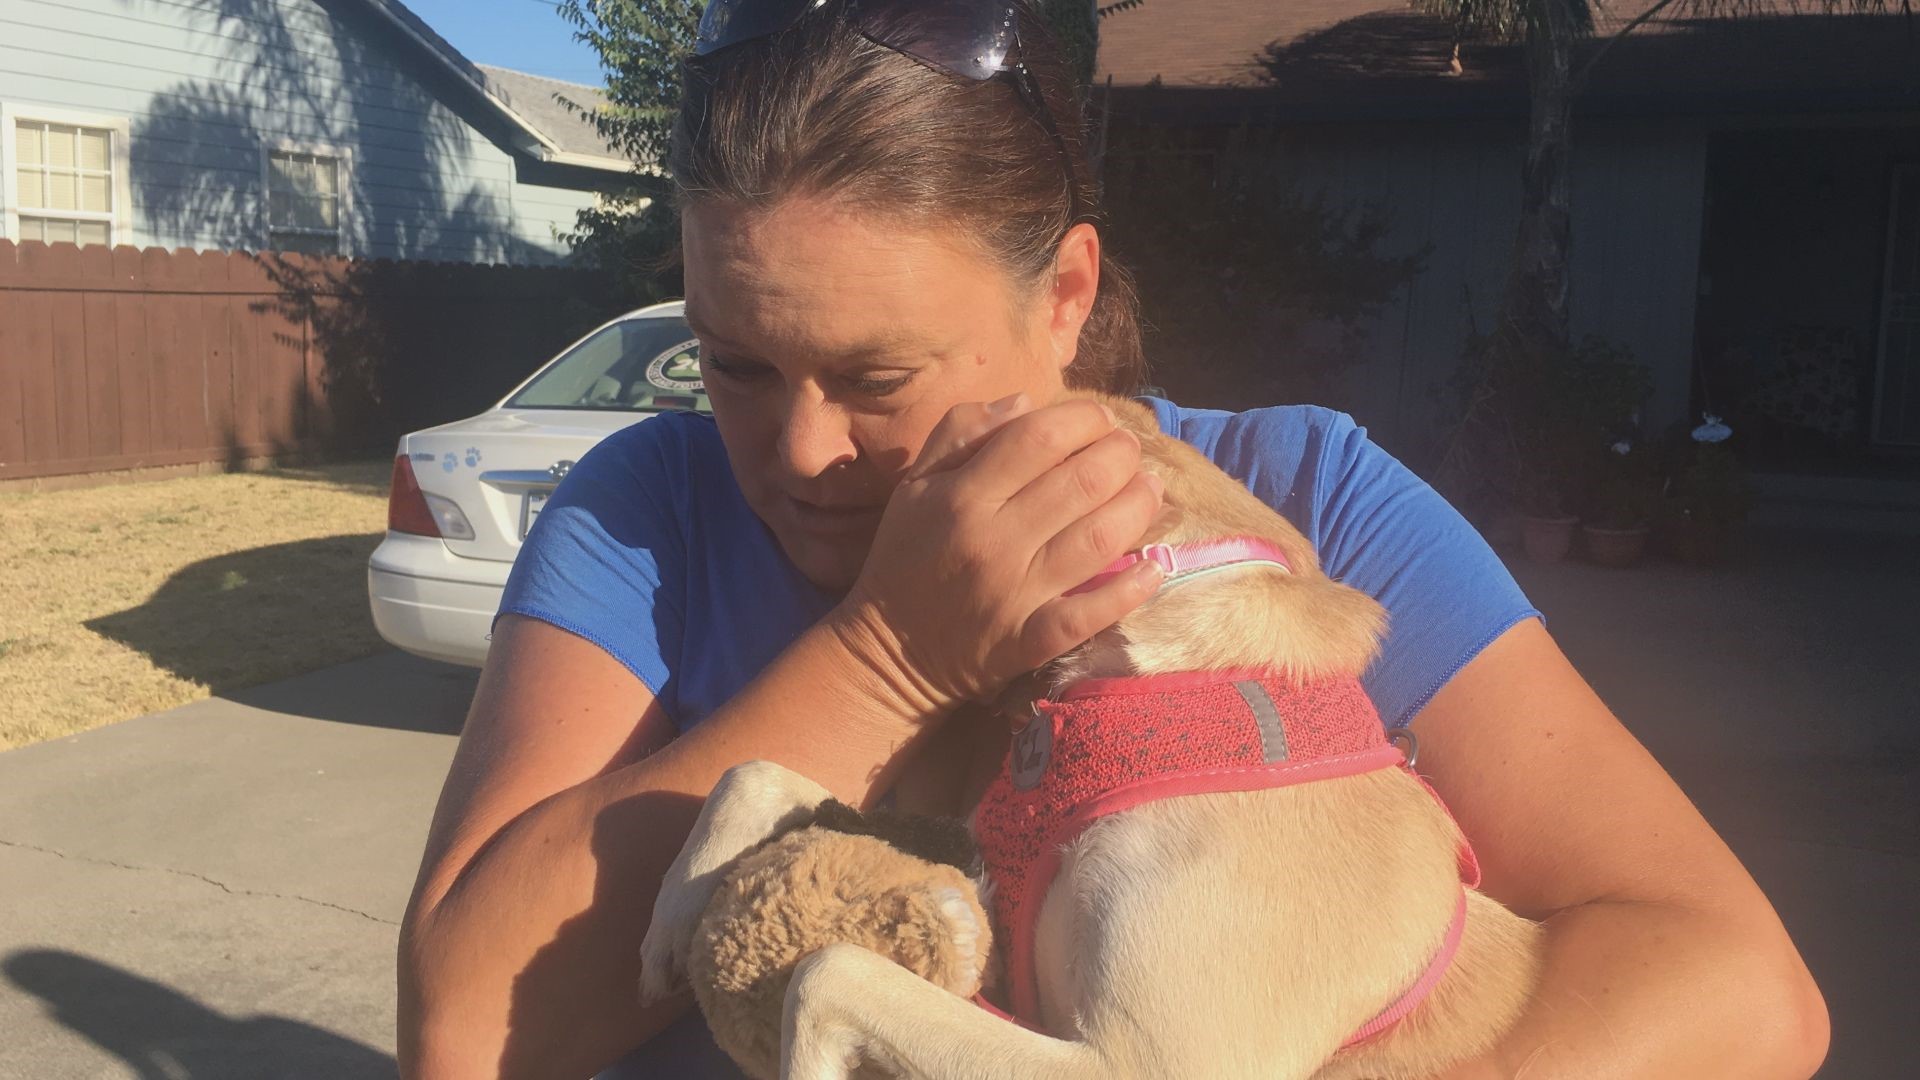 For five days, Sloan, a support animal for a young autistic child, was lost with no sign she would ever come home, but, on Thursday, a tip led Stockton police and an animal rescue group on the path toward reuniting the dog with the young child.